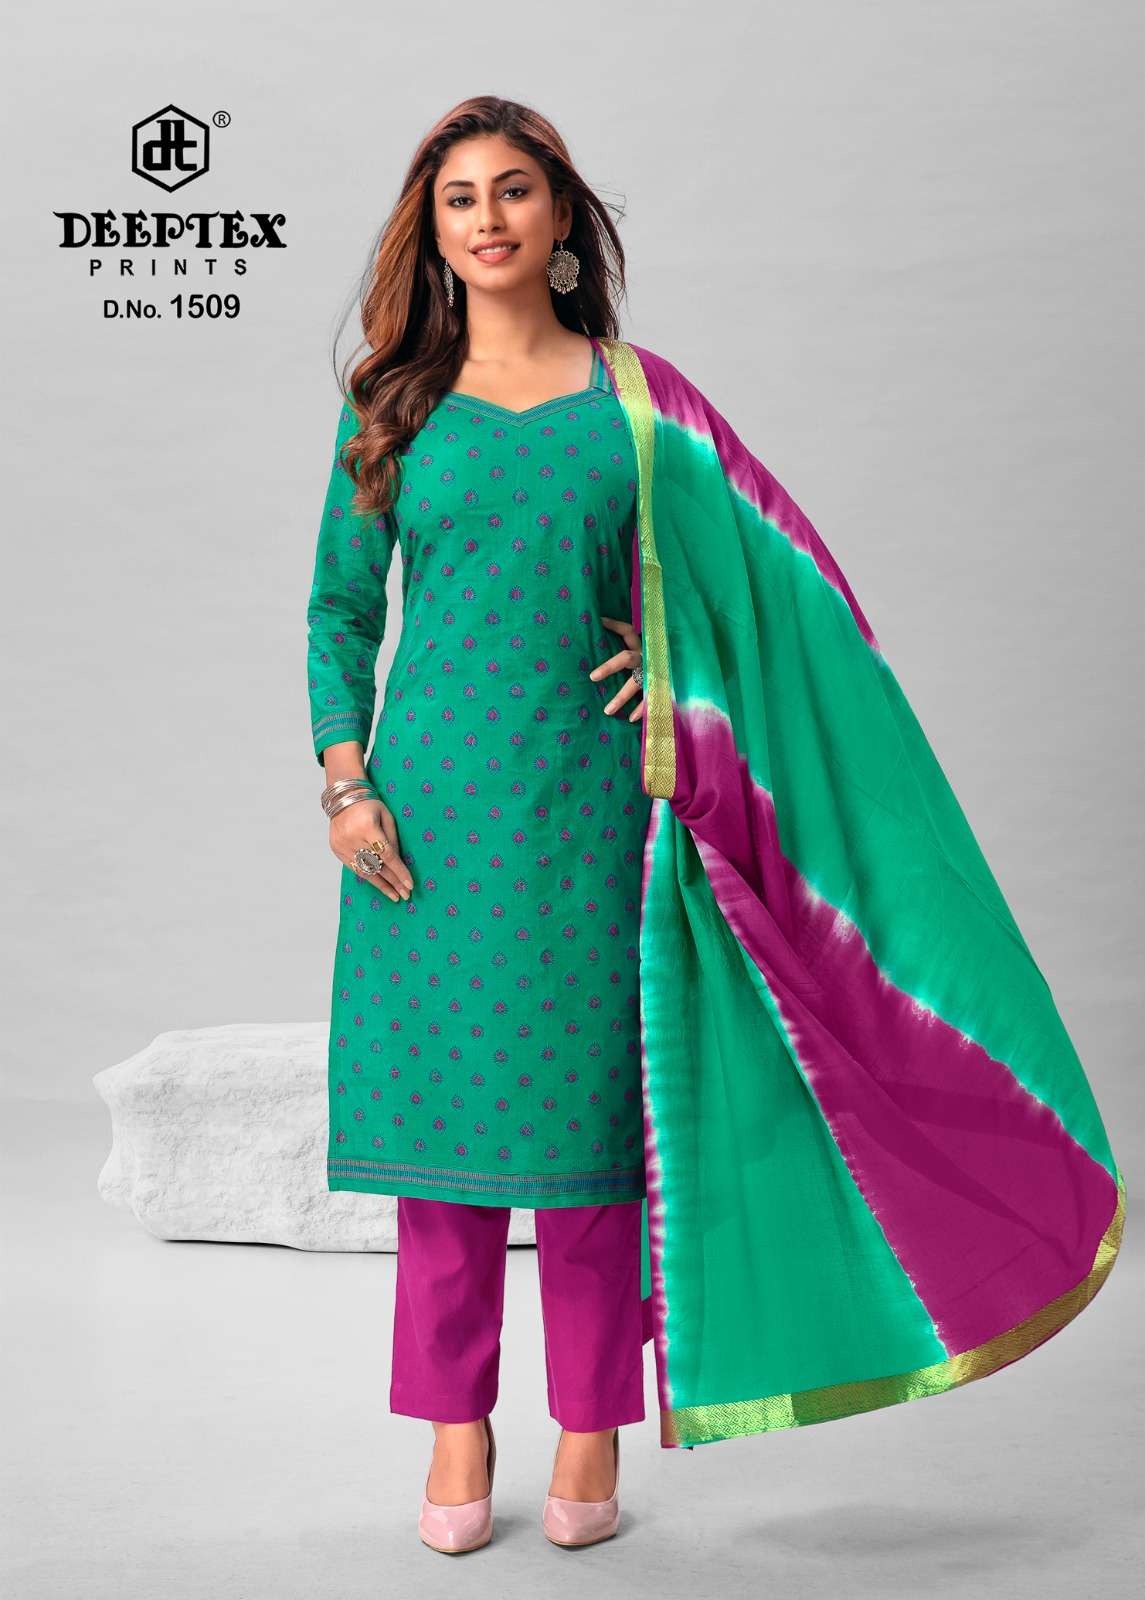 Deeptex Nayanthara Vol 7 Readymade Suits Catalog - The Ethnic World